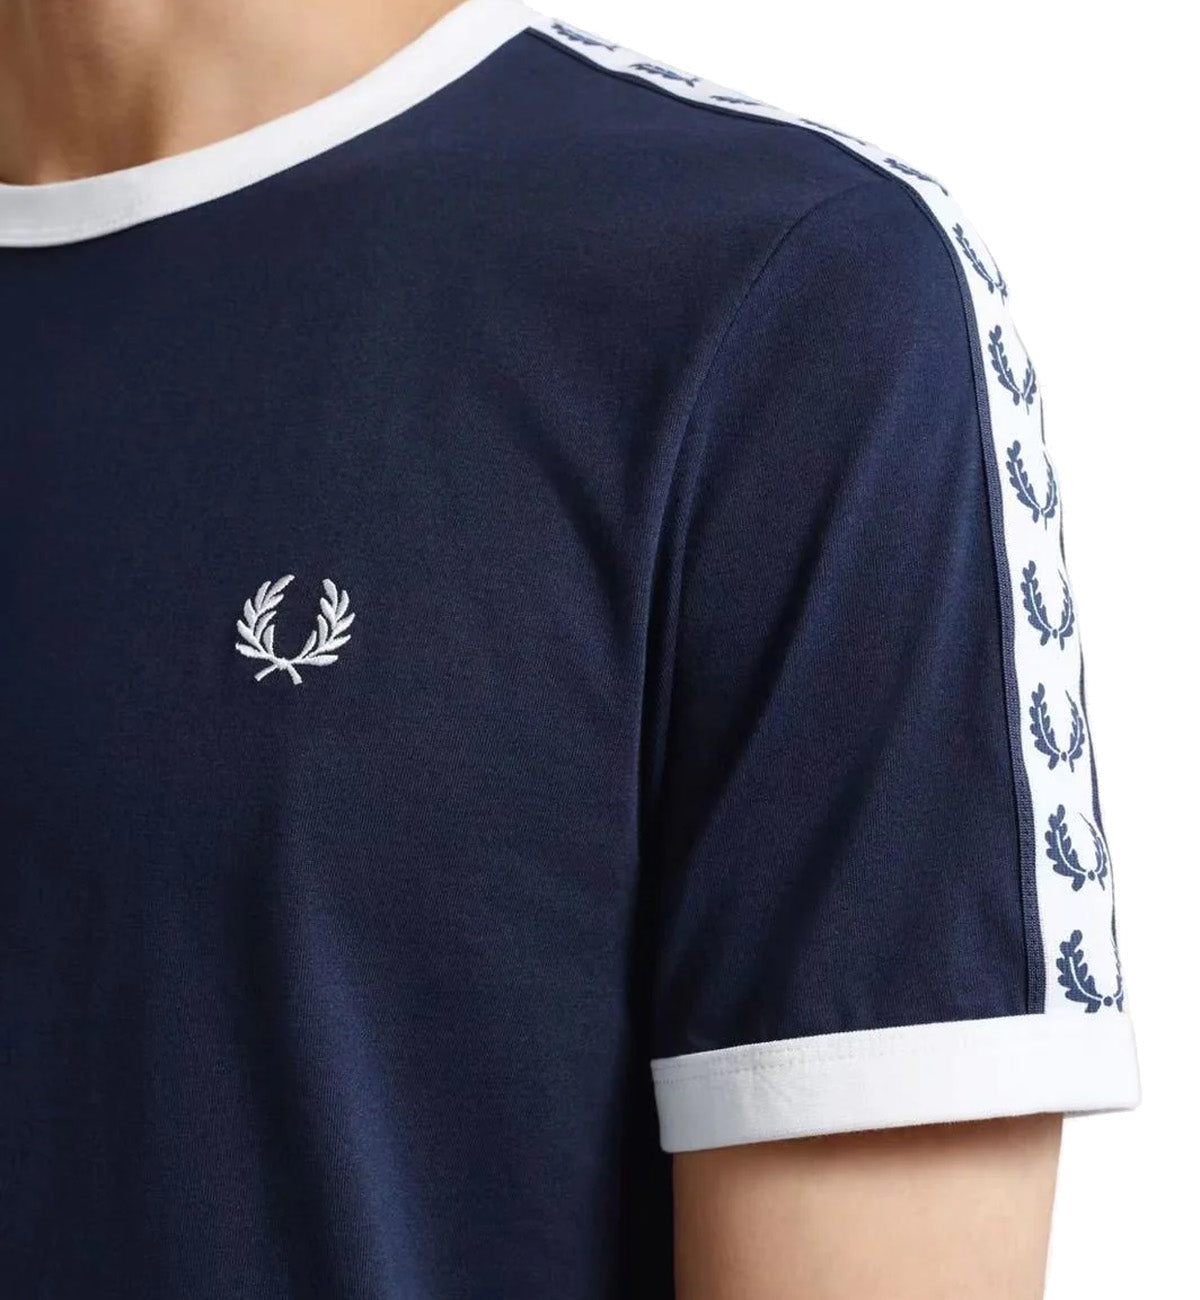 Fred Perry Taped Ringer Tee - Navy Blue